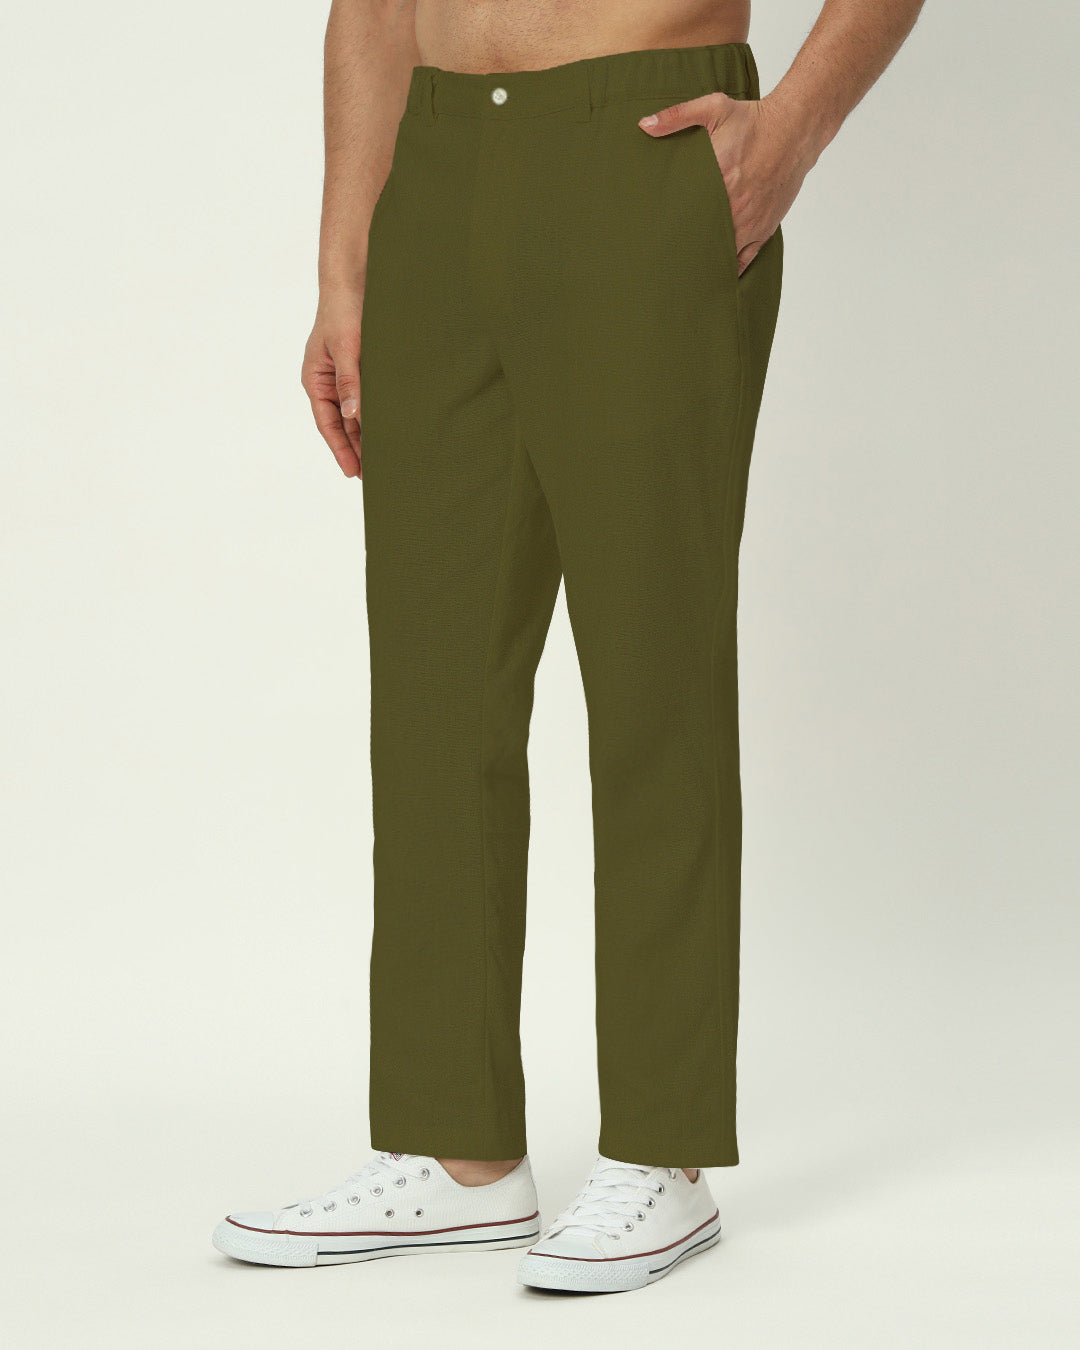 All-Day Wear Olive Green Men's Pants